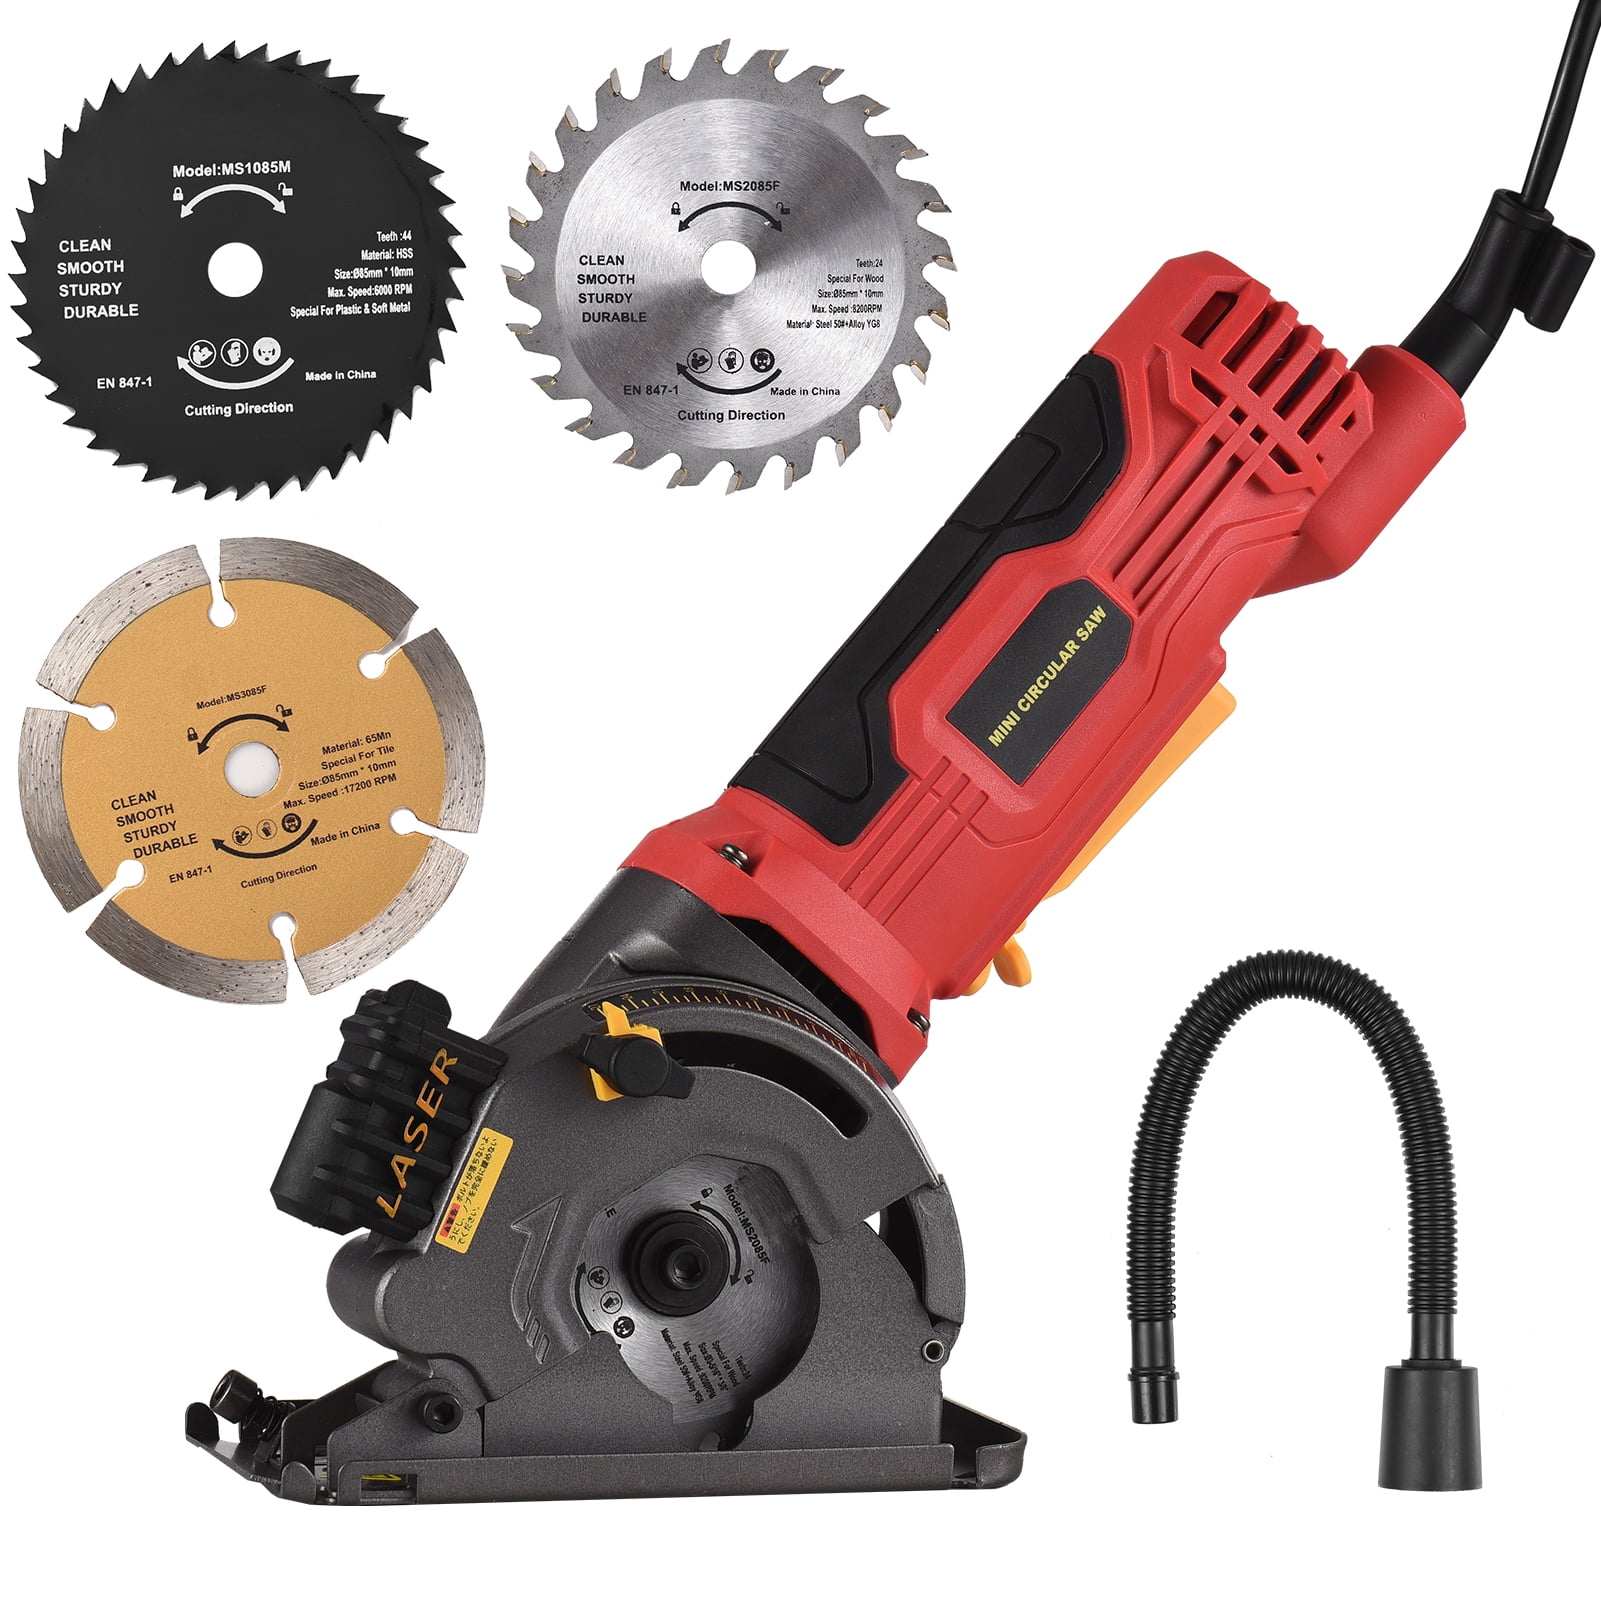 Walmeck 480W 3700RPM Circular Saw Corded Amp Electric Compact Circular Saw  with Guide Scale Ruler Port for Cutting Wood Tile Soft Metal